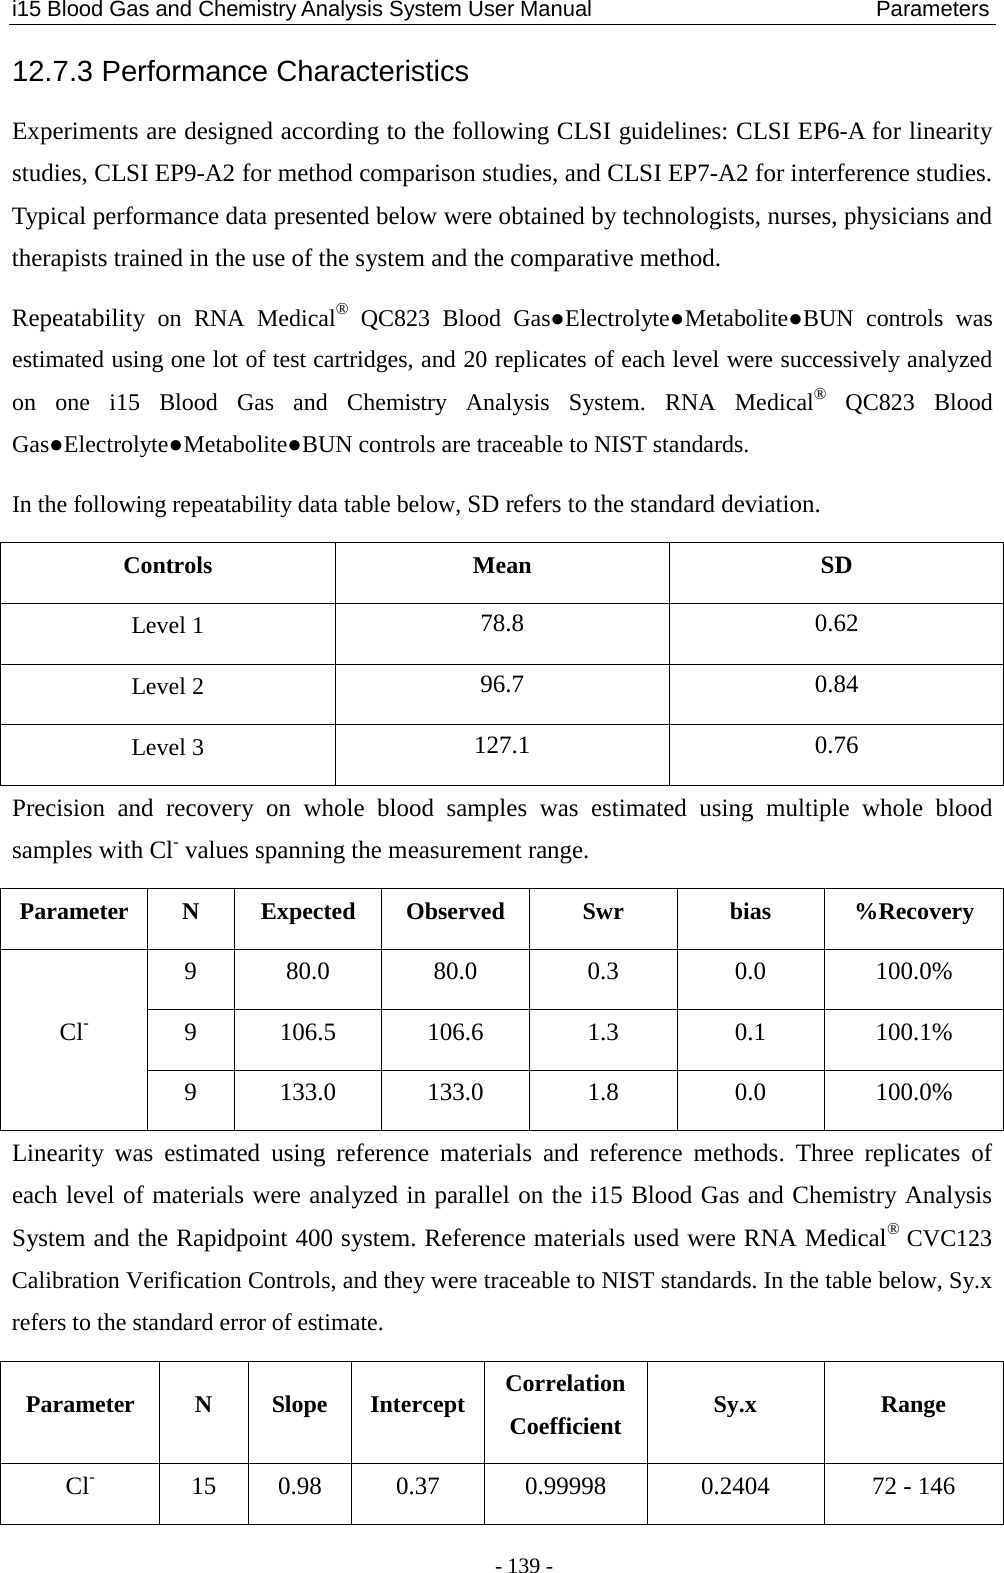 i15 Blood Gas and Chemistry Analysis System User Manual                            Parameters - 139 - 12.7.3 Performance Characteristics Experiments are designed according to the following CLSI guidelines: CLSI EP6-A for linearity studies, CLSI EP9-A2 for method comparison studies, and CLSI EP7-A2 for interference studies. Typical performance data presented below were obtained by technologists, nurses, physicians and therapists trained in the use of the system and the comparative method. Repeatability on RNA Medical® QC823 Blood Gas●Electrolyte●Metabolite●BUN  controls  was estimated using one lot of test cartridges, and 20 replicates of each level were successively analyzed on  one  i15 Blood Gas and Chemistry Analysis System. RNA Medical® QC823 Blood Gas●Electrolyte●Metabolite●BUN controls are traceable to NIST standards. In the following repeatability data table below, SD refers to the standard deviation. Controls  Mean SD Level 1 78.8  0.62 Level 2  96.7  0.84 Level 3 127.1  0.76 Precision and recovery on  whole blood samples was estimated using multiple whole blood samples with Cl- values spanning the measurement range. Parameter  N  Expected  Observed Swr bias %Recovery Cl- 9  80.0  80.0  0.3  0.0  100.0% 9  106.5  106.6  1.3  0.1  100.1% 9  133.0  133.0  1.8  0.0  100.0% Linearity was estimated using  reference materials and reference methods.  Three replicates of each level of materials were analyzed in parallel on the i15 Blood Gas and Chemistry Analysis System and the Rapidpoint 400 system. Reference materials used were RNA Medical® CVC123 Calibration Verification Controls, and they were traceable to NIST standards. In the table below, Sy.x refers to the standard error of estimate. Parameter  N  Slope Intercept Correlation Coefficient  Sy.x  Range Cl- 15  0.98  0.37  0.99998  0.2404  72 - 146 